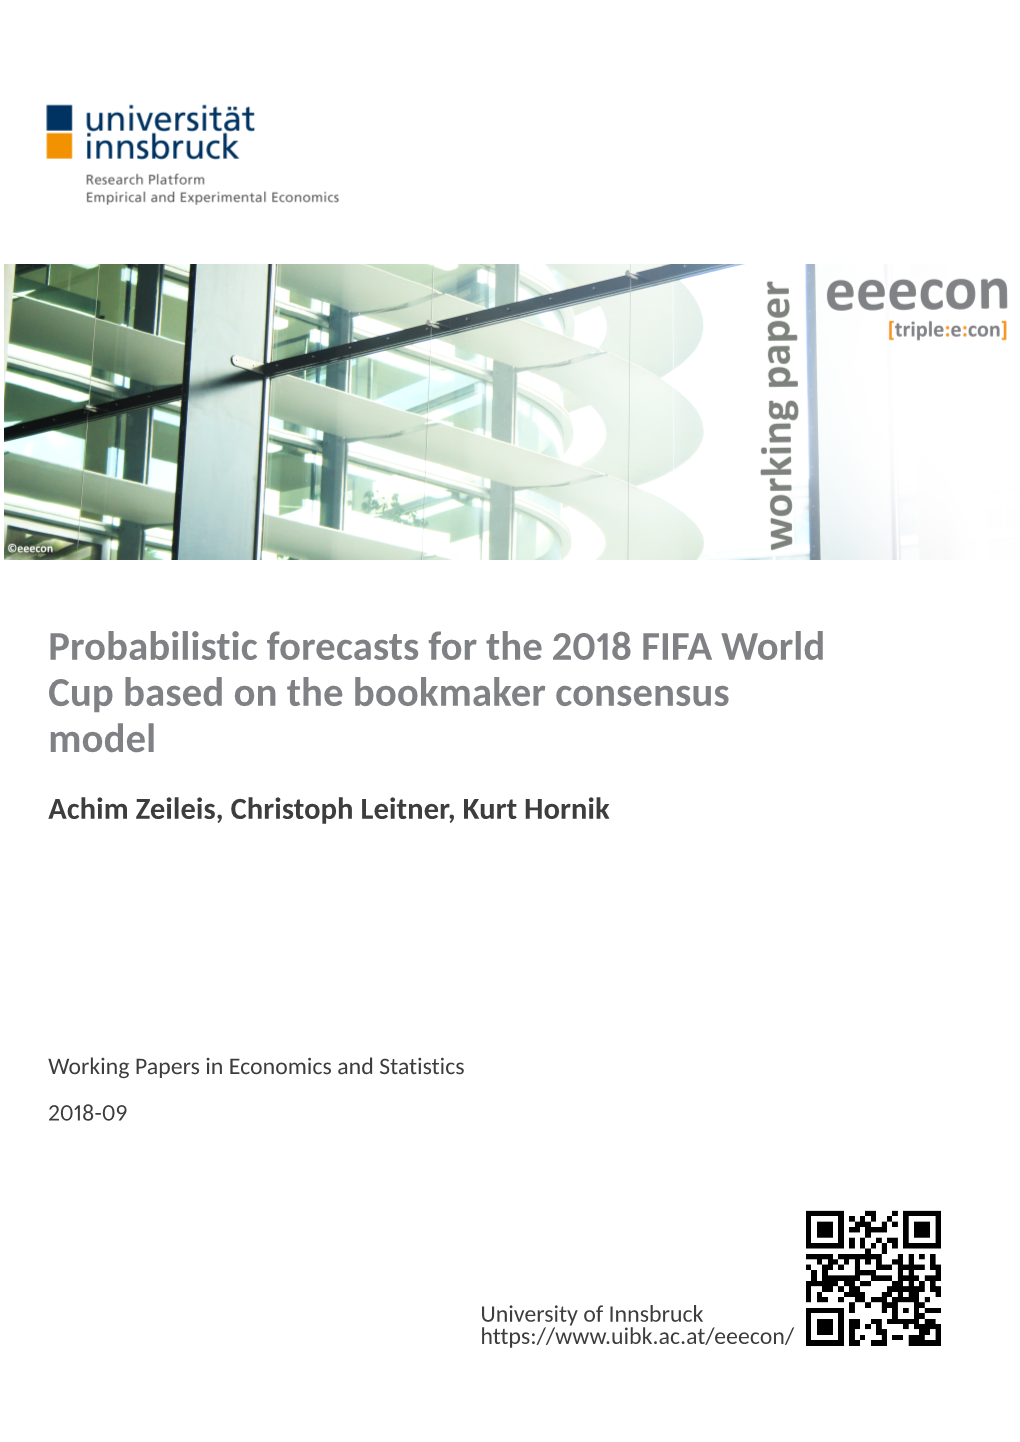 Probabilistic Forecasts for the FIFA World Cup Based on the Bookmaker Consensus Model